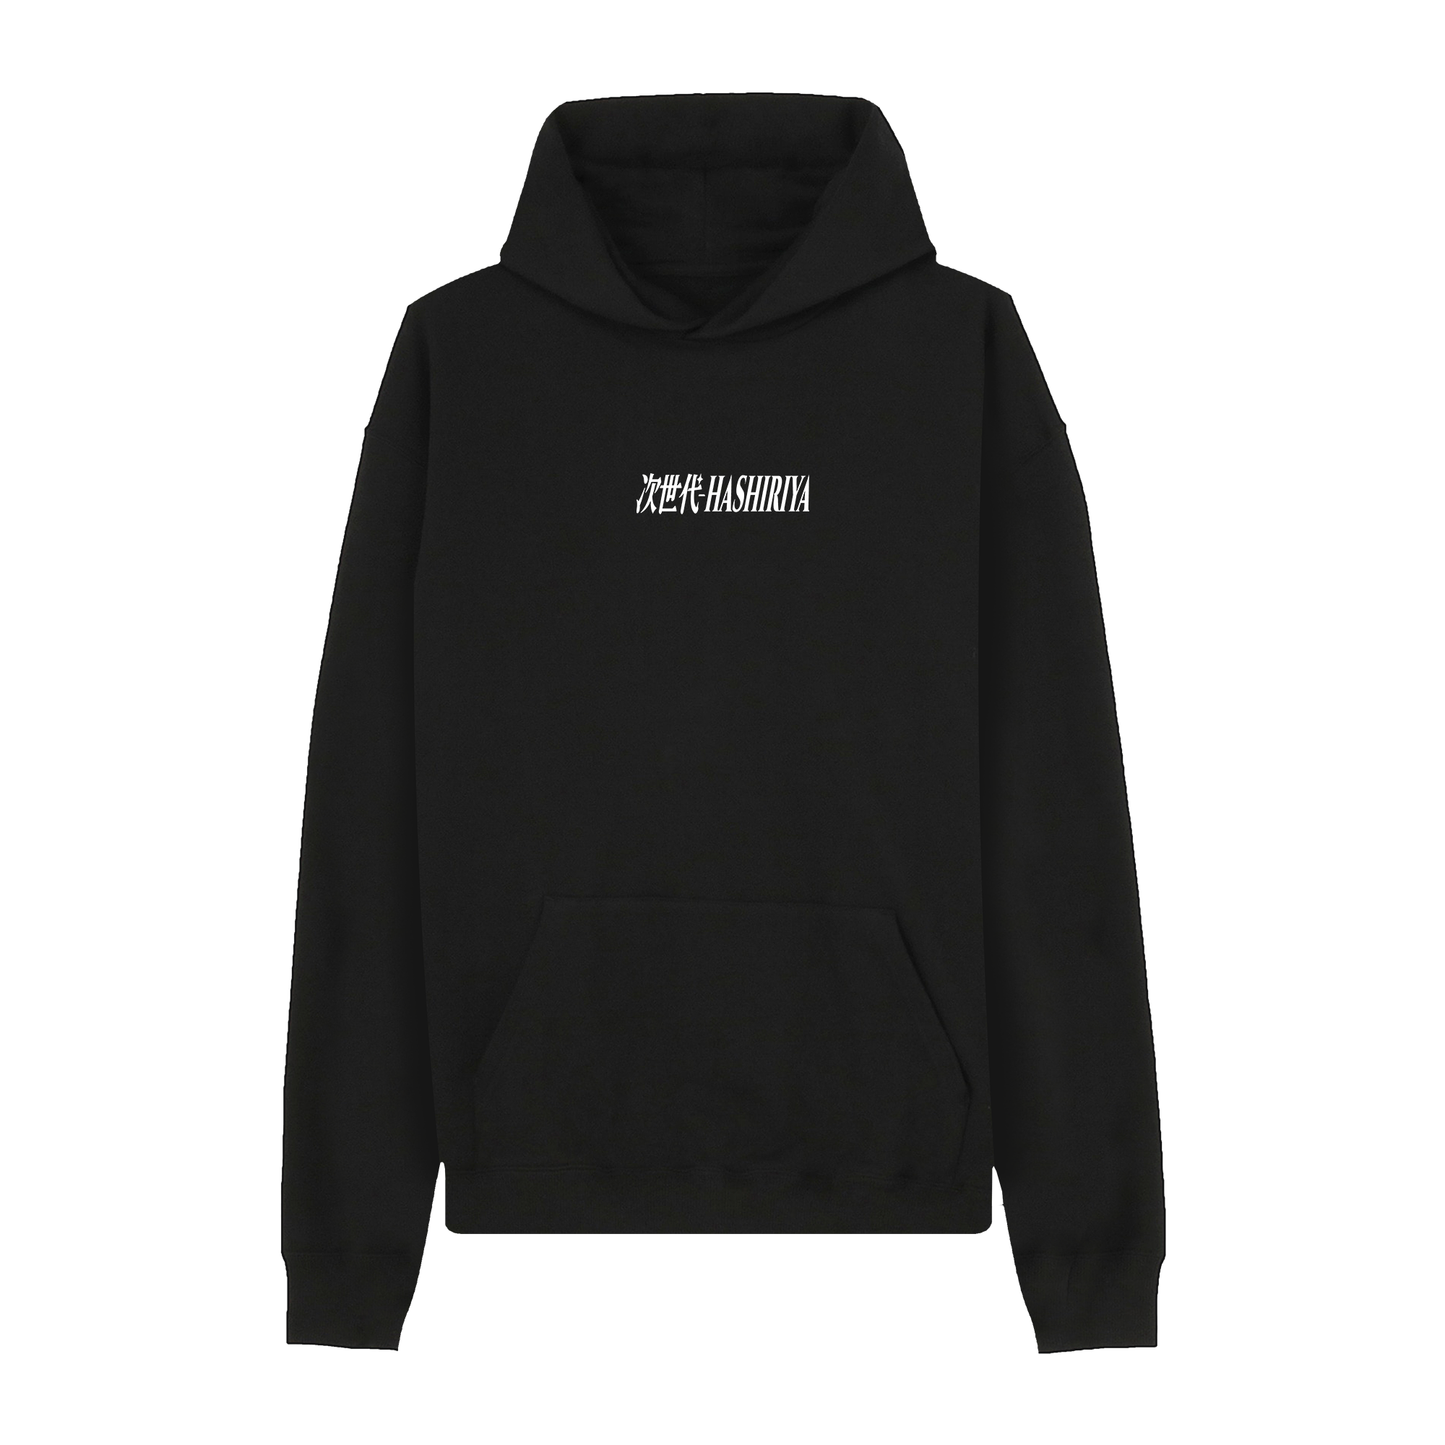 [𝙎𝙊𝙇𝘿 𝙊𝙐𝙏] 'FD Touge Attack' Hoodie